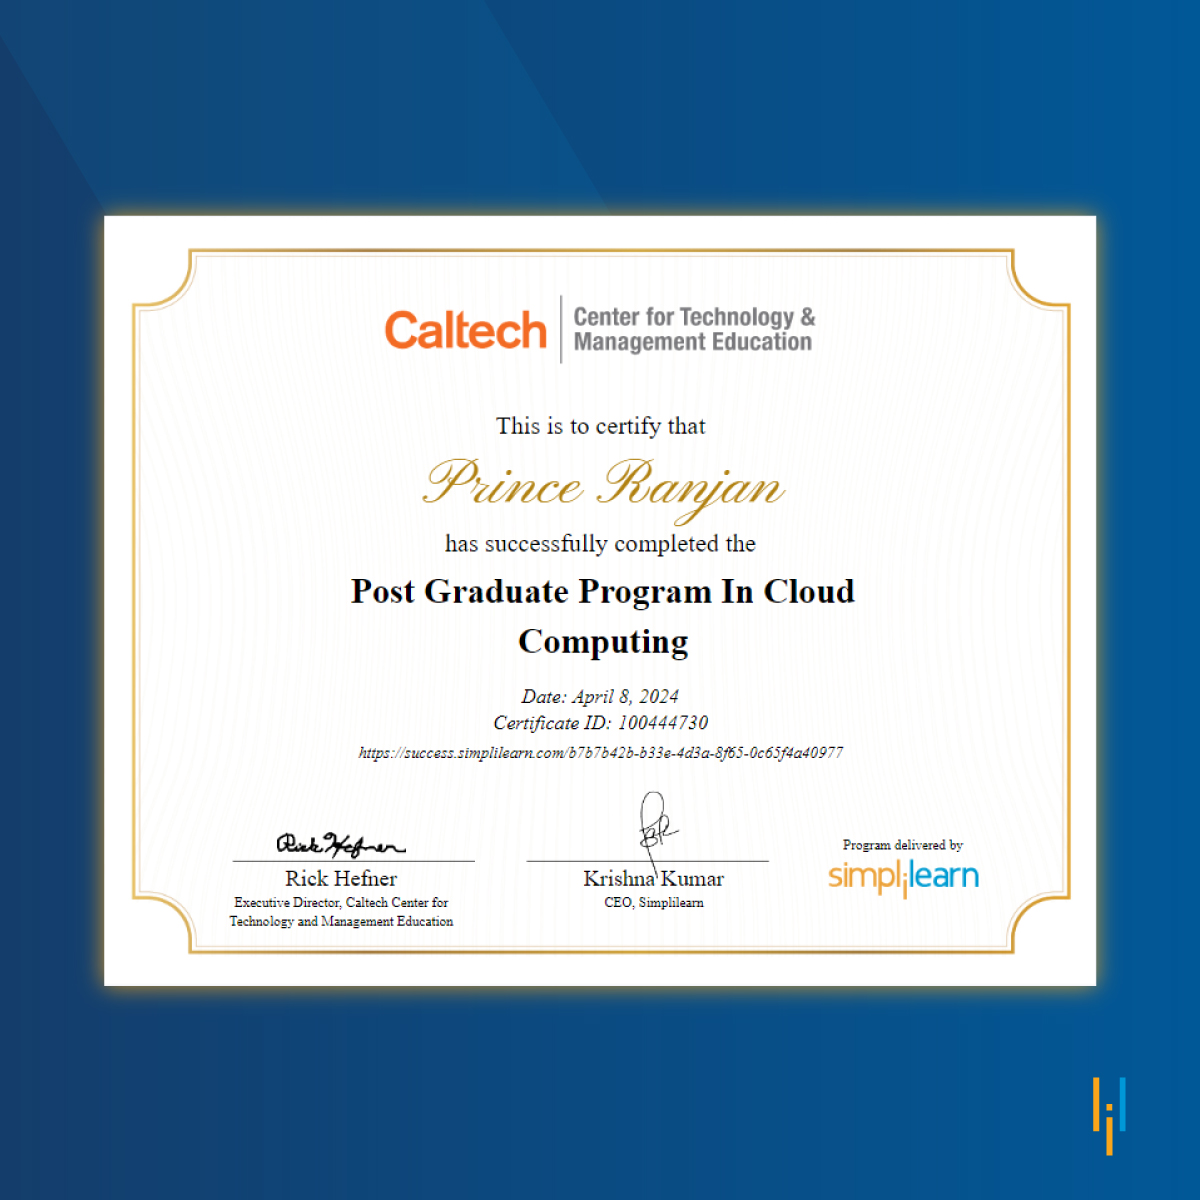 Congratulations to Prince Ranjan for his incredible achievement in completing the Simplilearn Post Graduate Program in Cloud Computing in collaboration with Caltech CTME! His accomplishments, bolstered by certifications aligned with AWS and Microsoft Azure, showcase his…